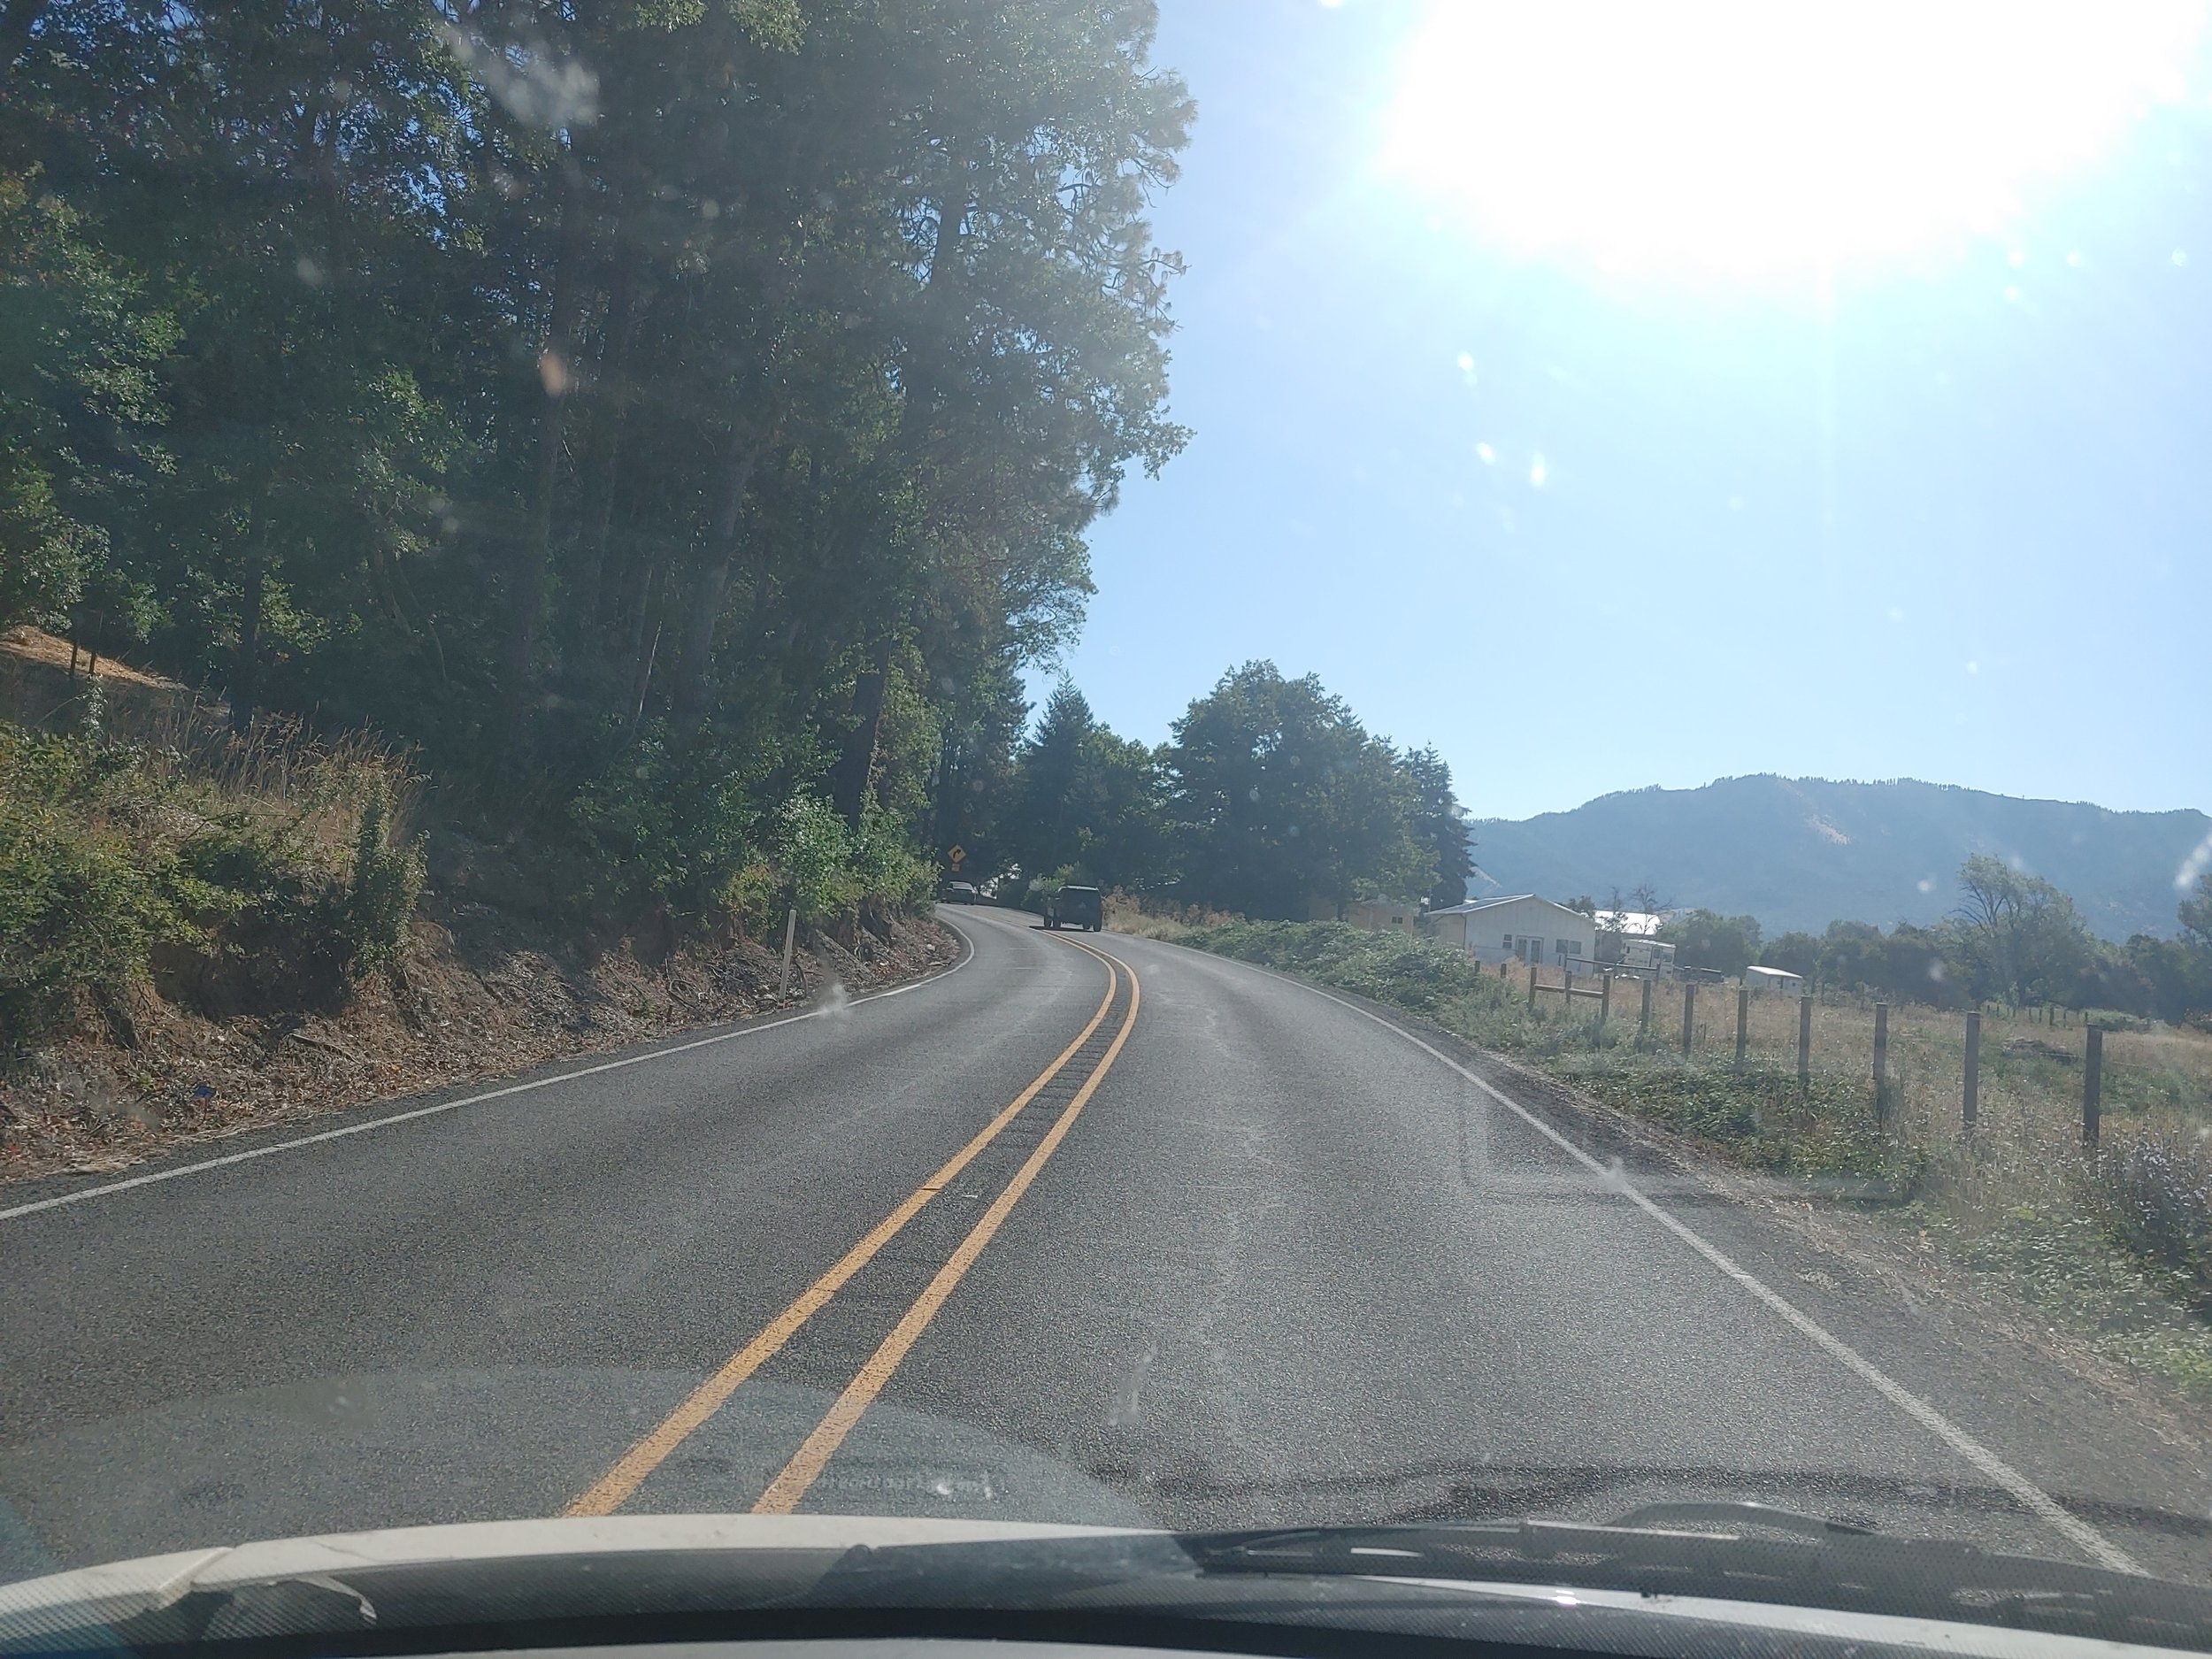  Heading down the secret highways to Ashland, Oregon to see some of my favorite cutie patooties!  